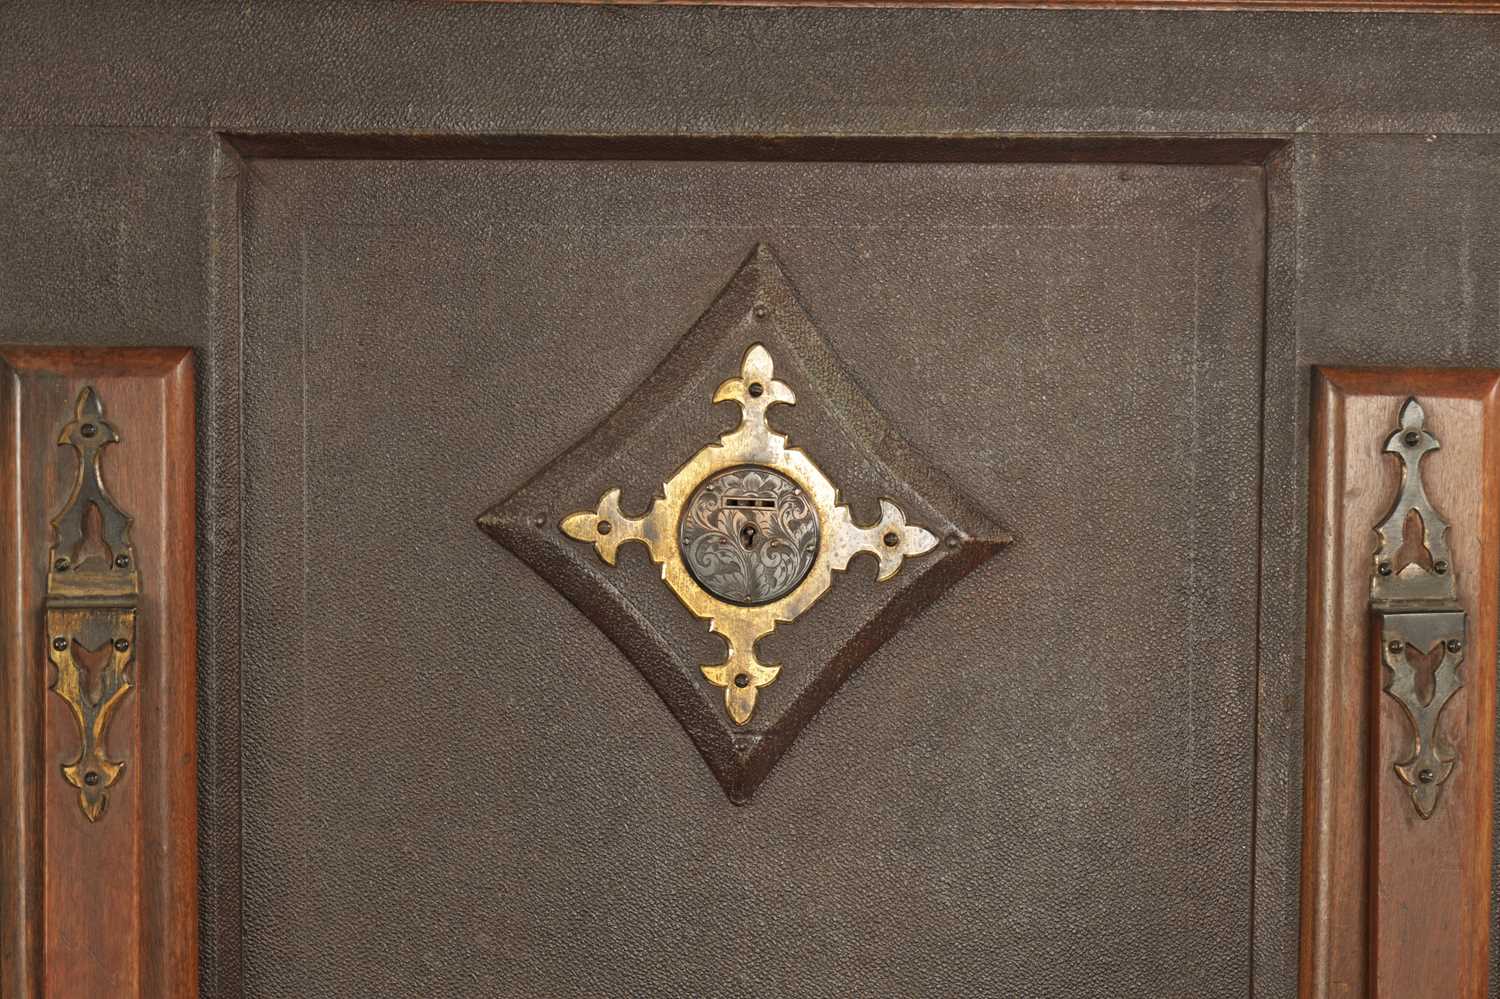 A LATE 19TH-CENTURY PUGINESQUE OAK AND LEATHERWORK FOLIO STAND - Image 3 of 9